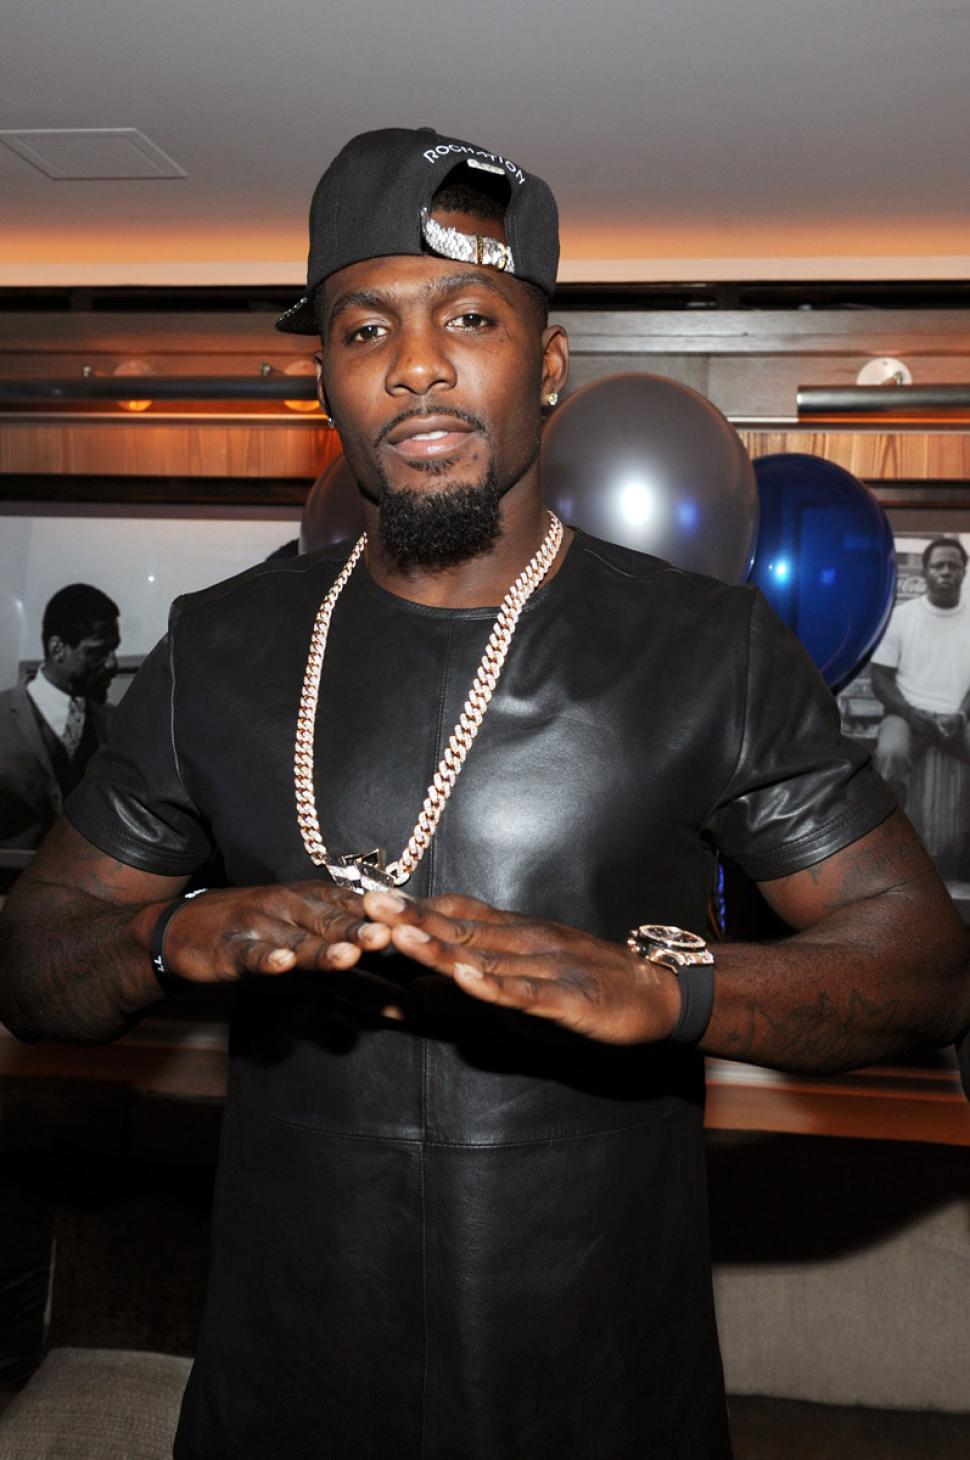 Dez Bryant throws up the Roc-A-Fella symbol at the 40/40 Club while celebrating his signing with Roc Nation.